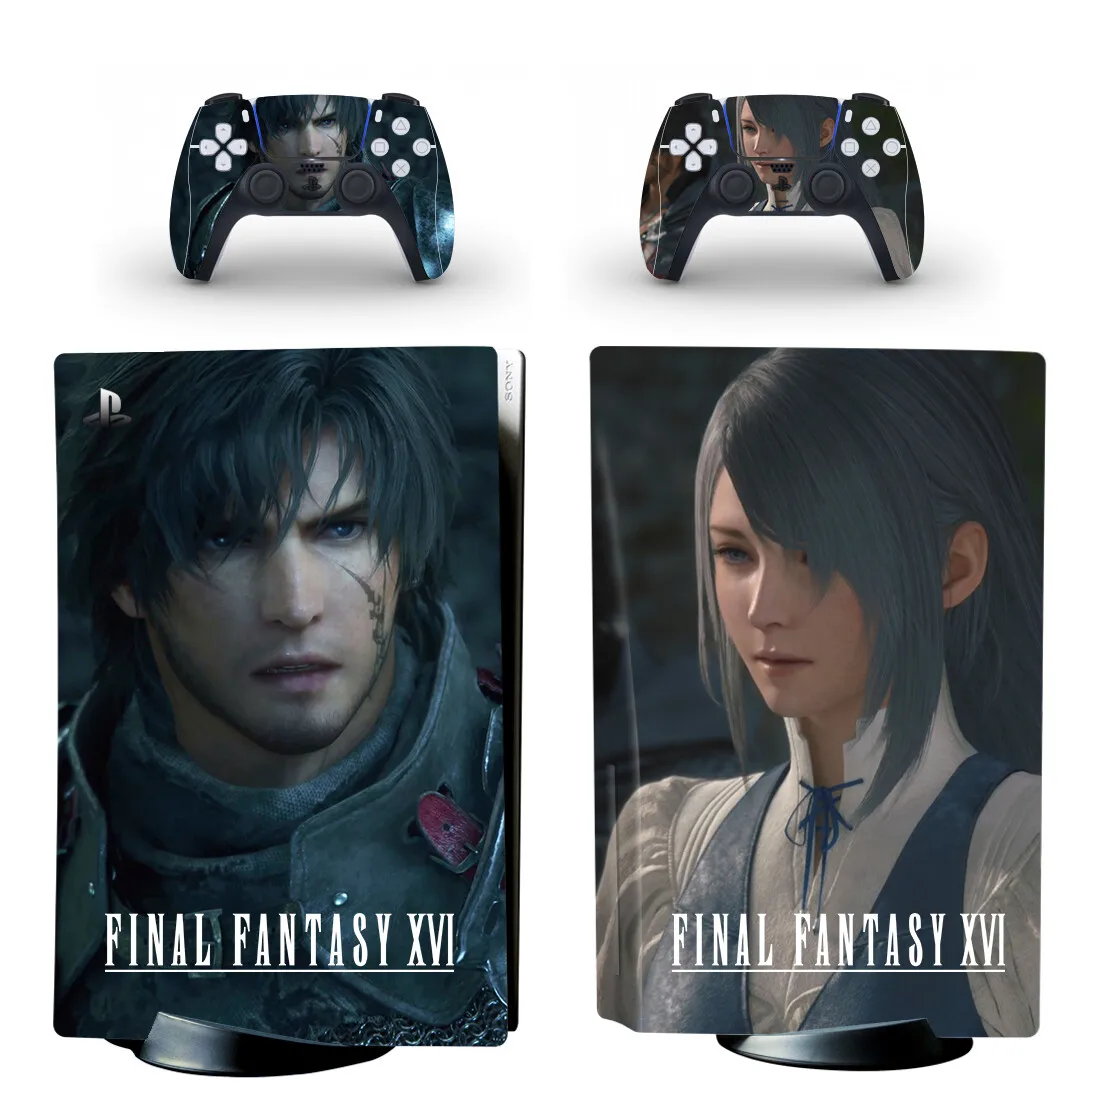 How to Pre-Order the Final Fantasy 16 PS5 Controller and Cover (US)